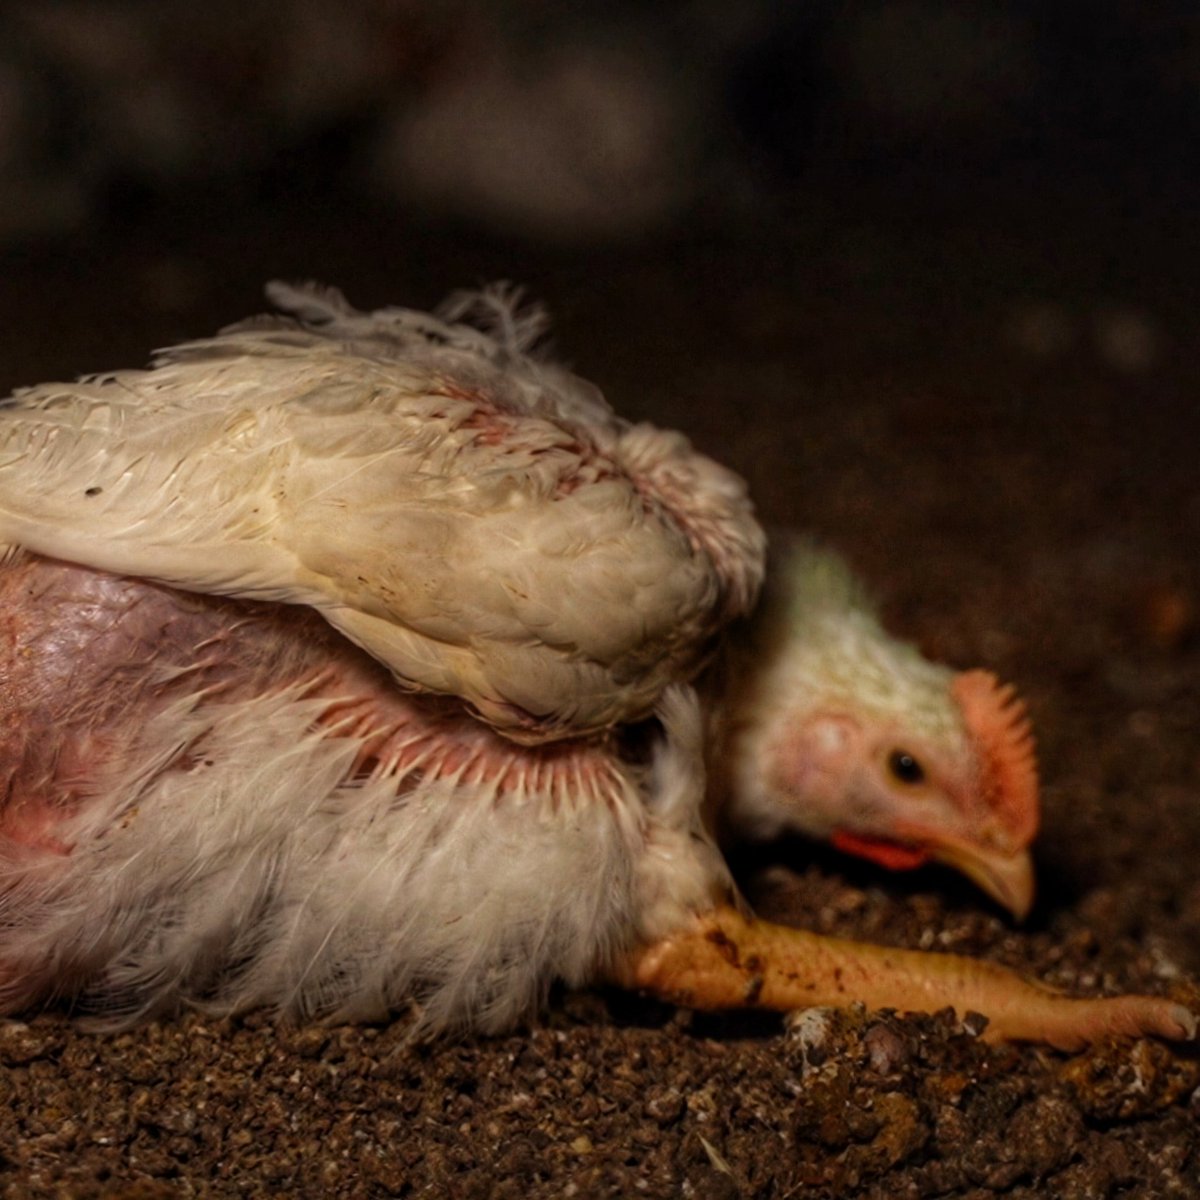 'Our chickens are free to be chickens' Petaluma Poultry #AnimalCruelty #Chicken